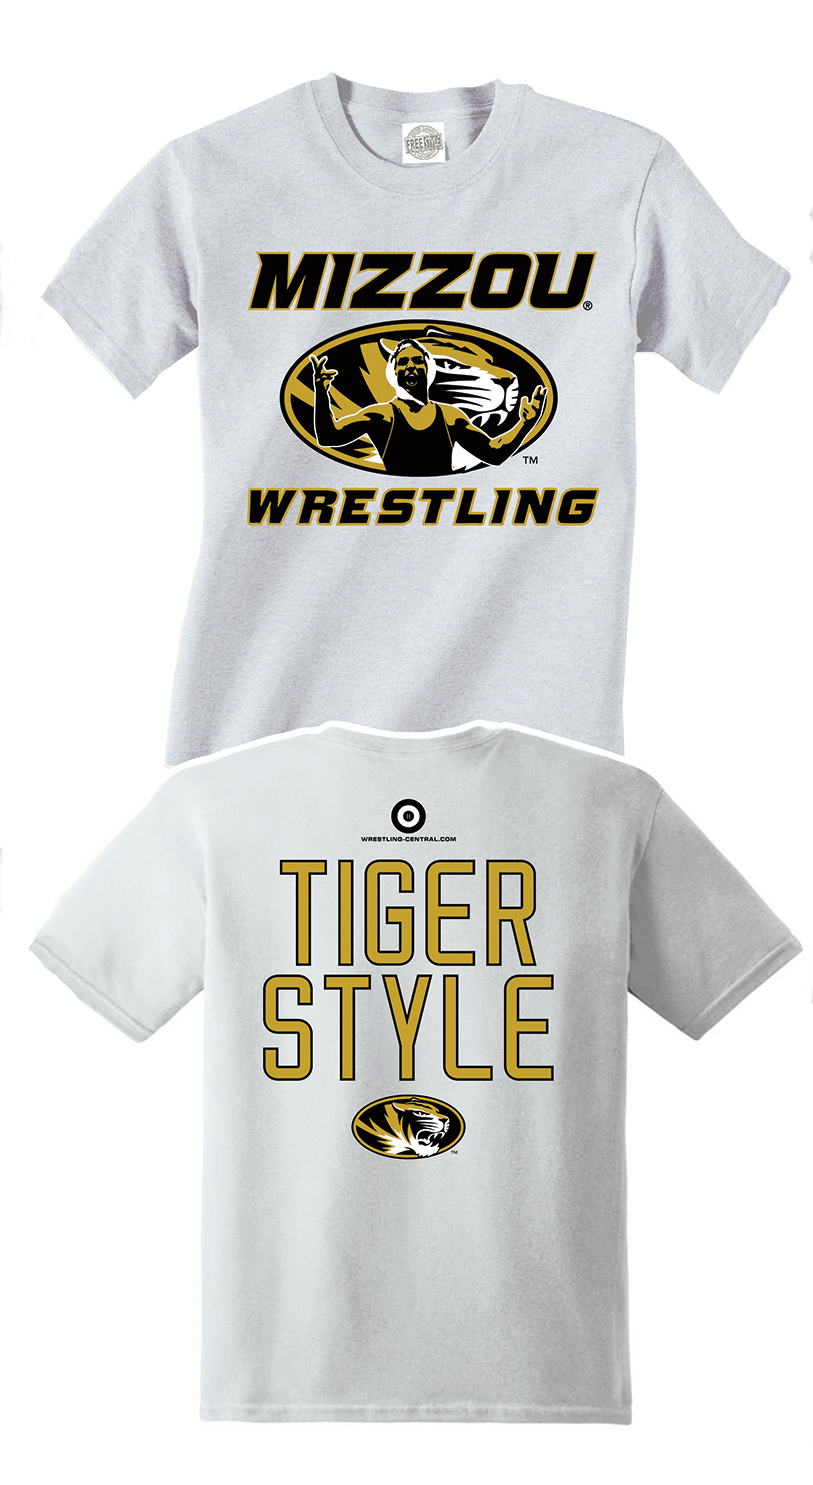 NCAA MIZZOU Wrestling / Tiger Style S/S T-Shirt, color: White